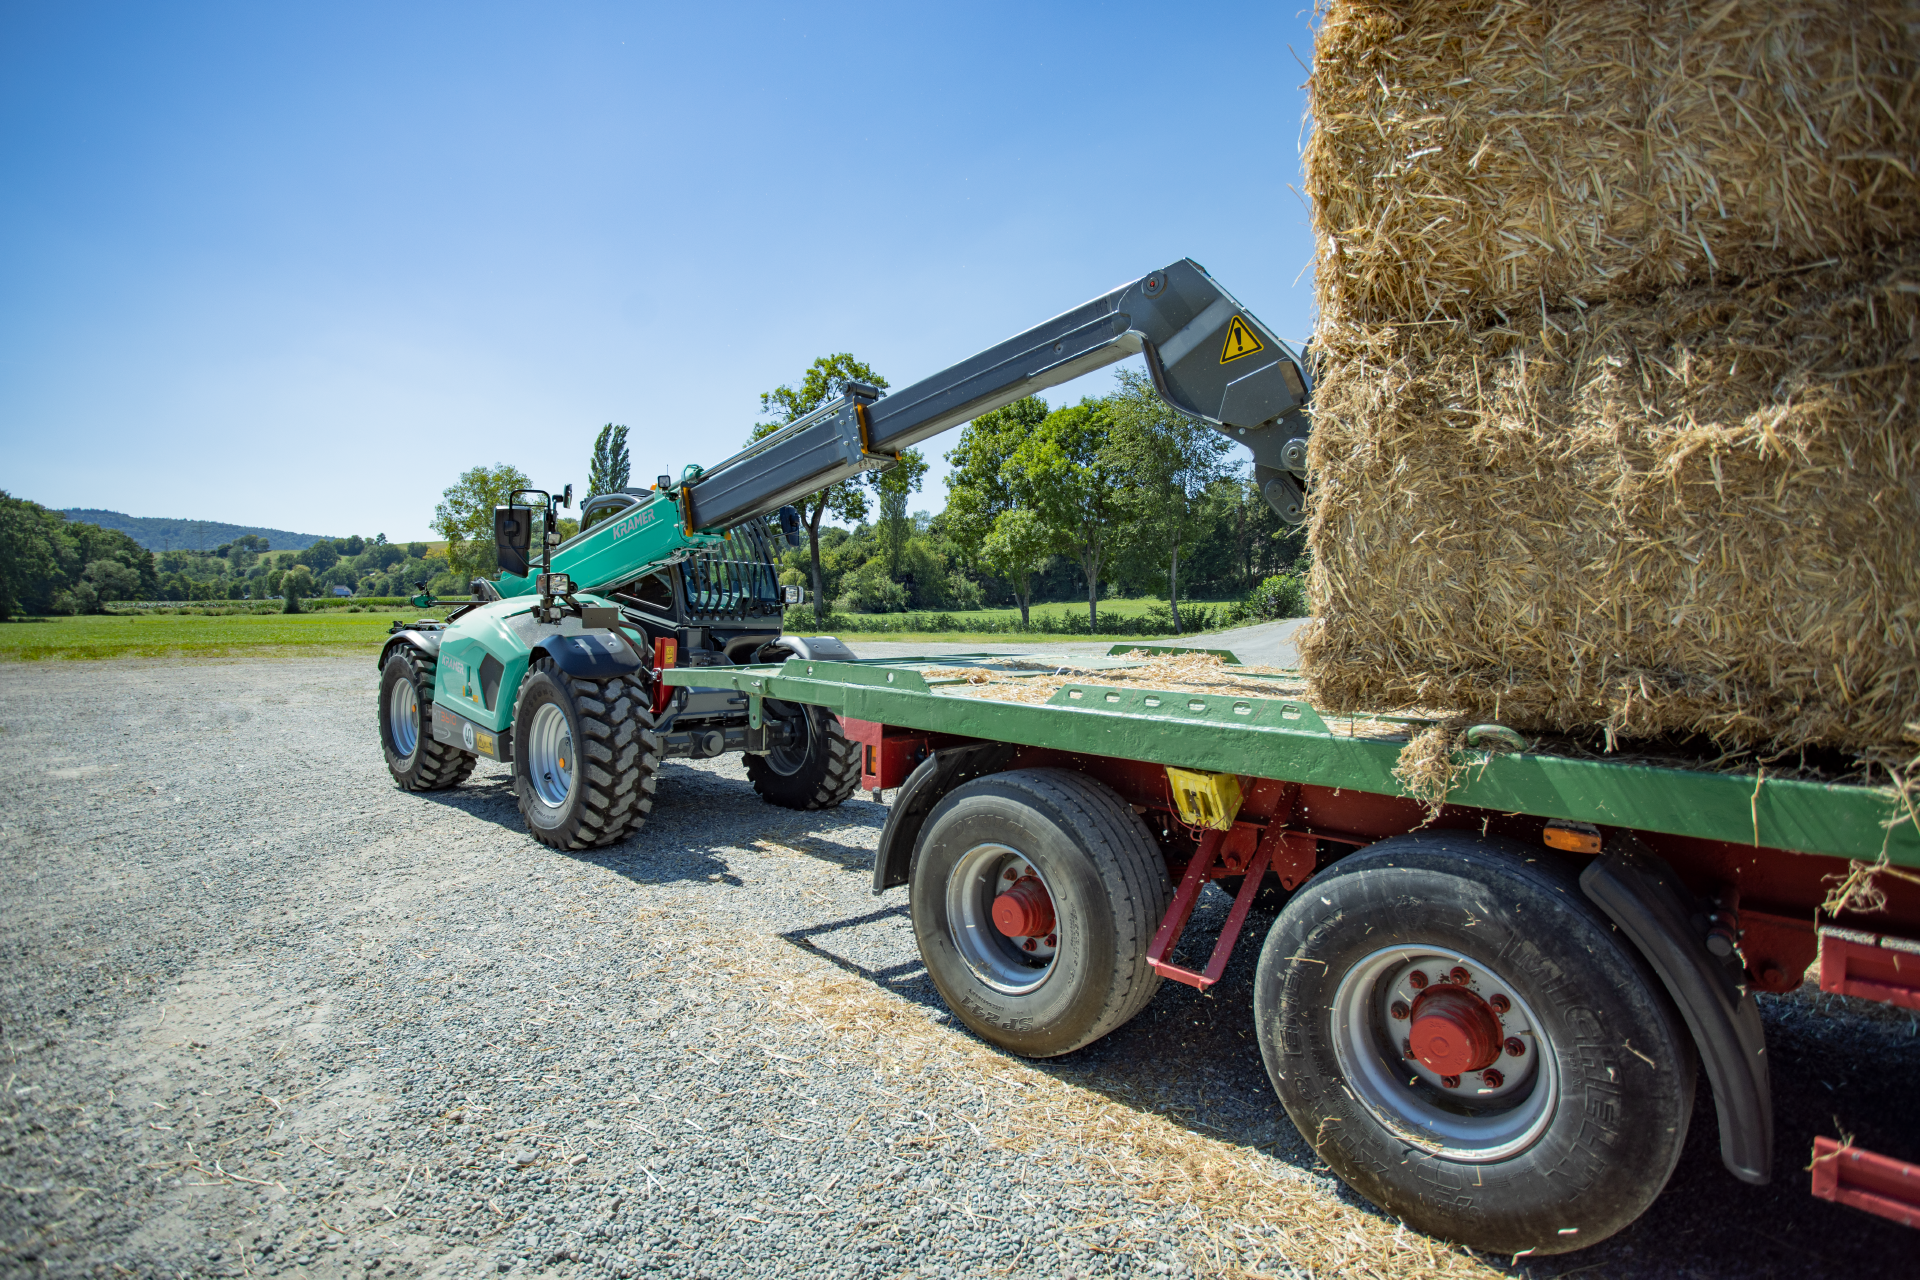 With its 10 metre stacking height, the KT3610 easily reaches all straw bales.